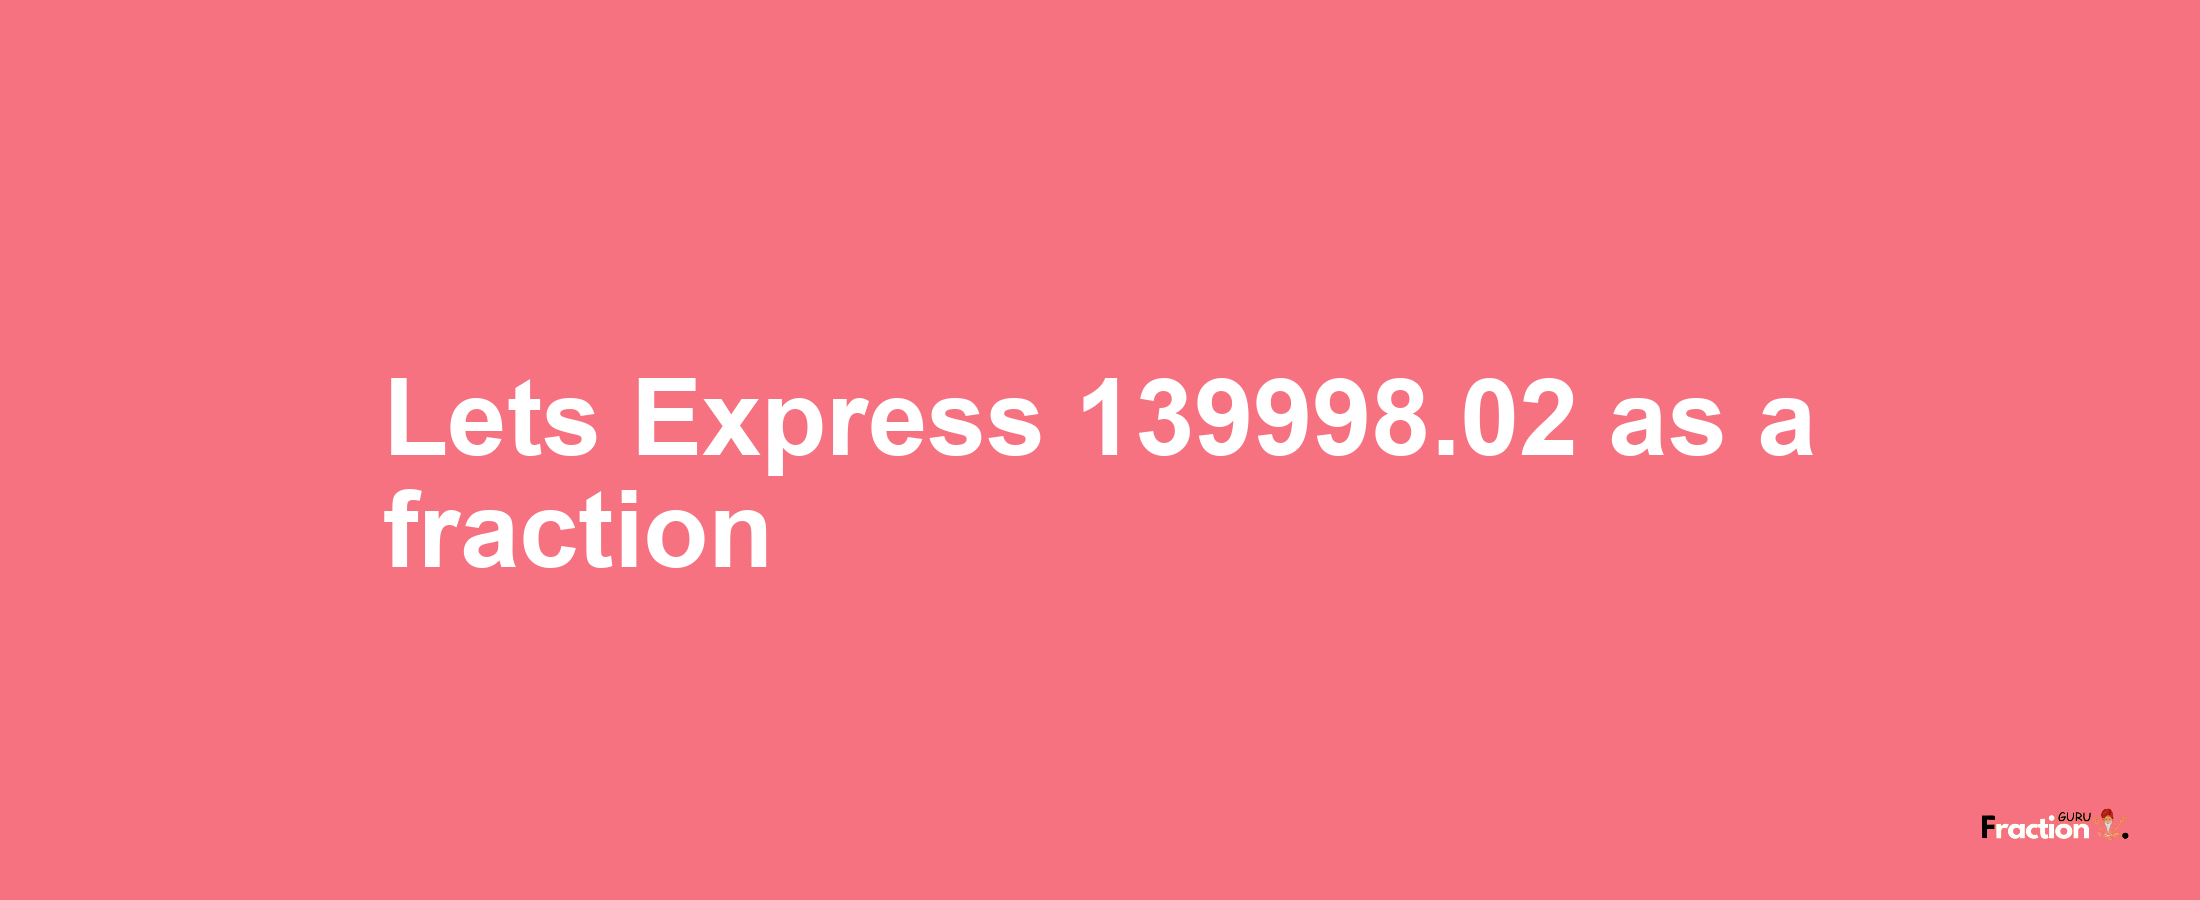 Lets Express 139998.02 as afraction